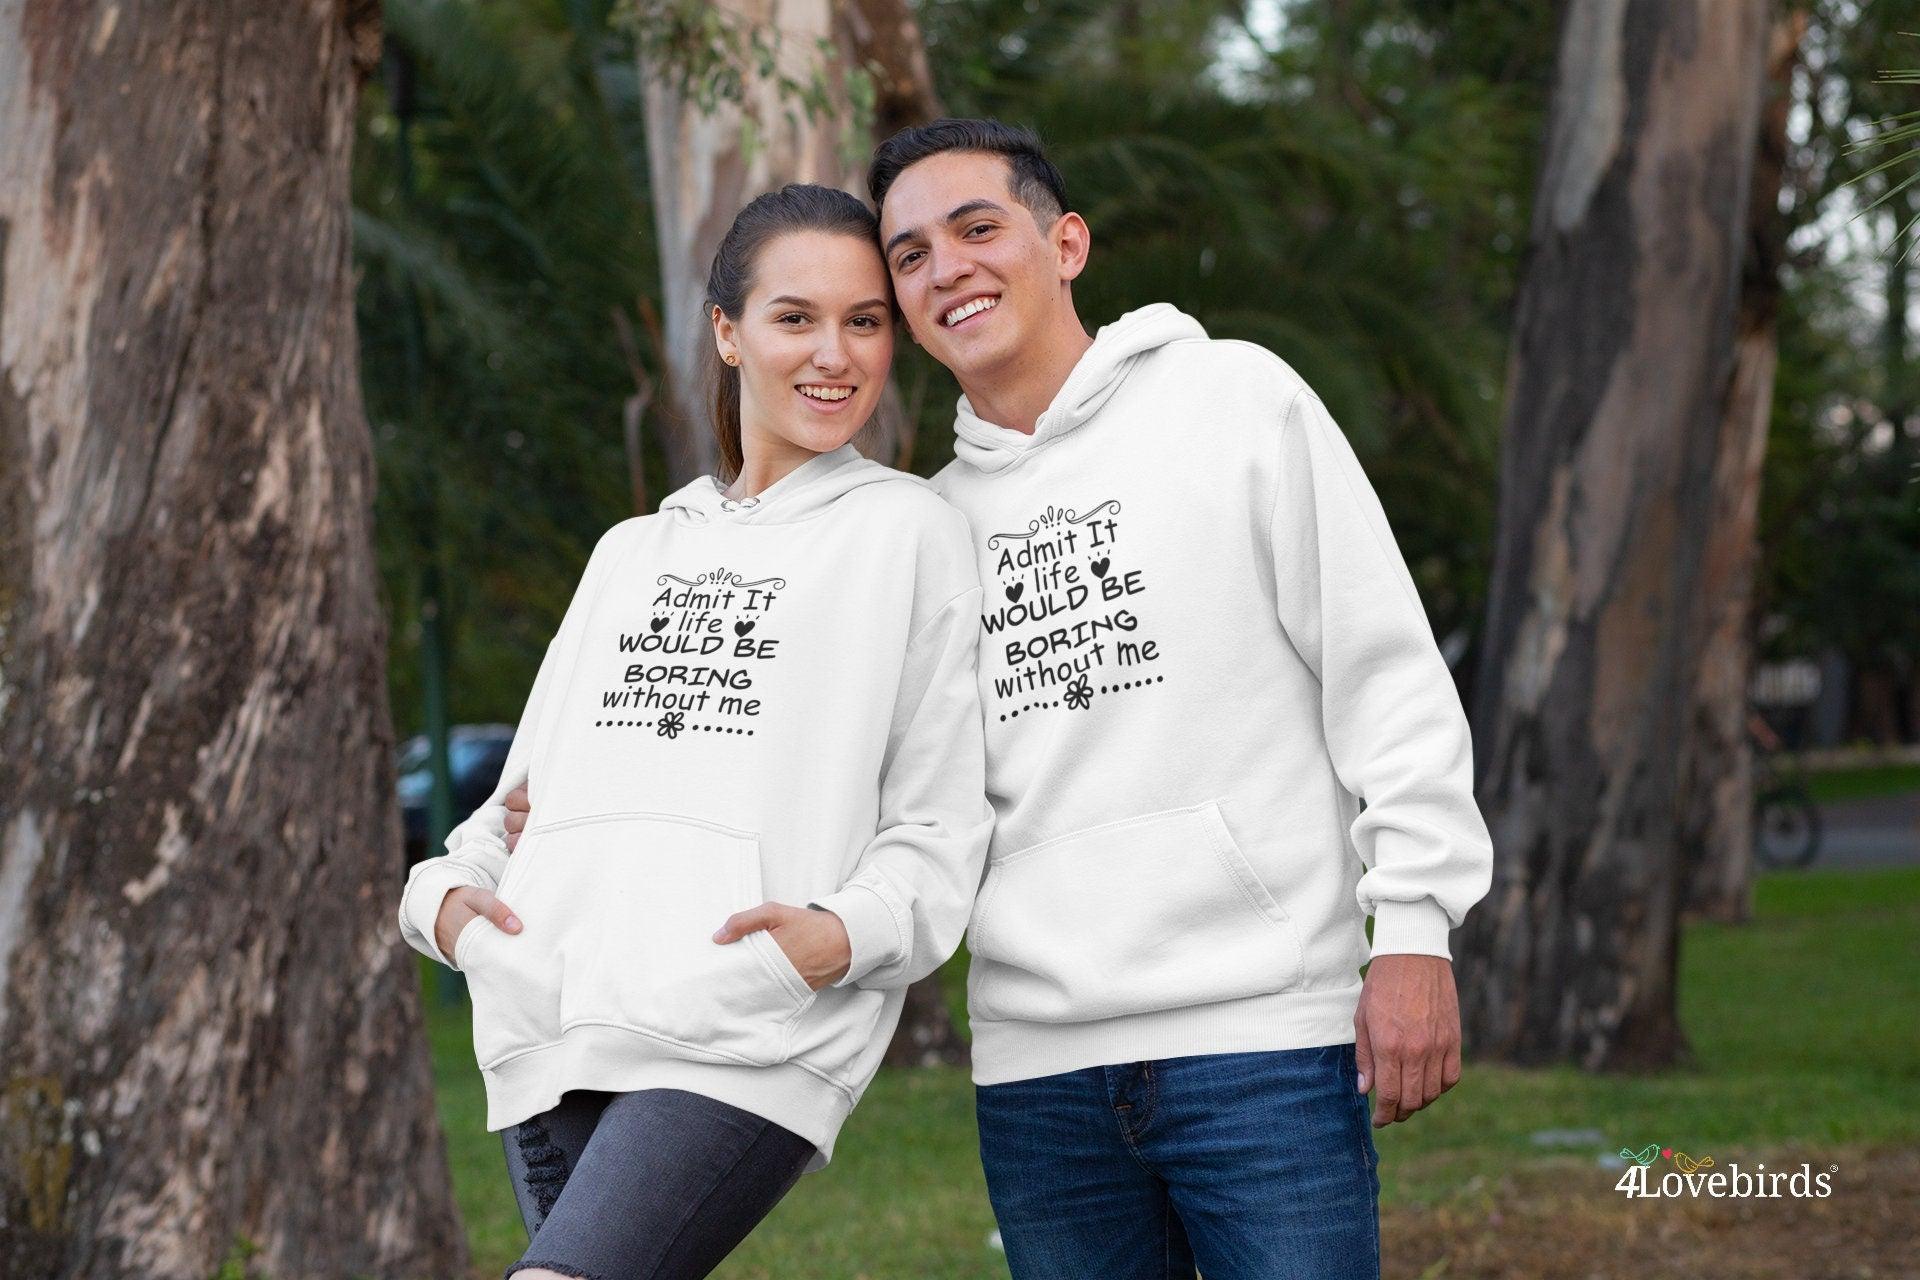 Admit it would be life boring wthout me Hoodie, Funny T-shirt, Gift for Couples, Valentine Sweatshirt, Boyfriend and Girlfriend Longsleeve - 4Lovebirds